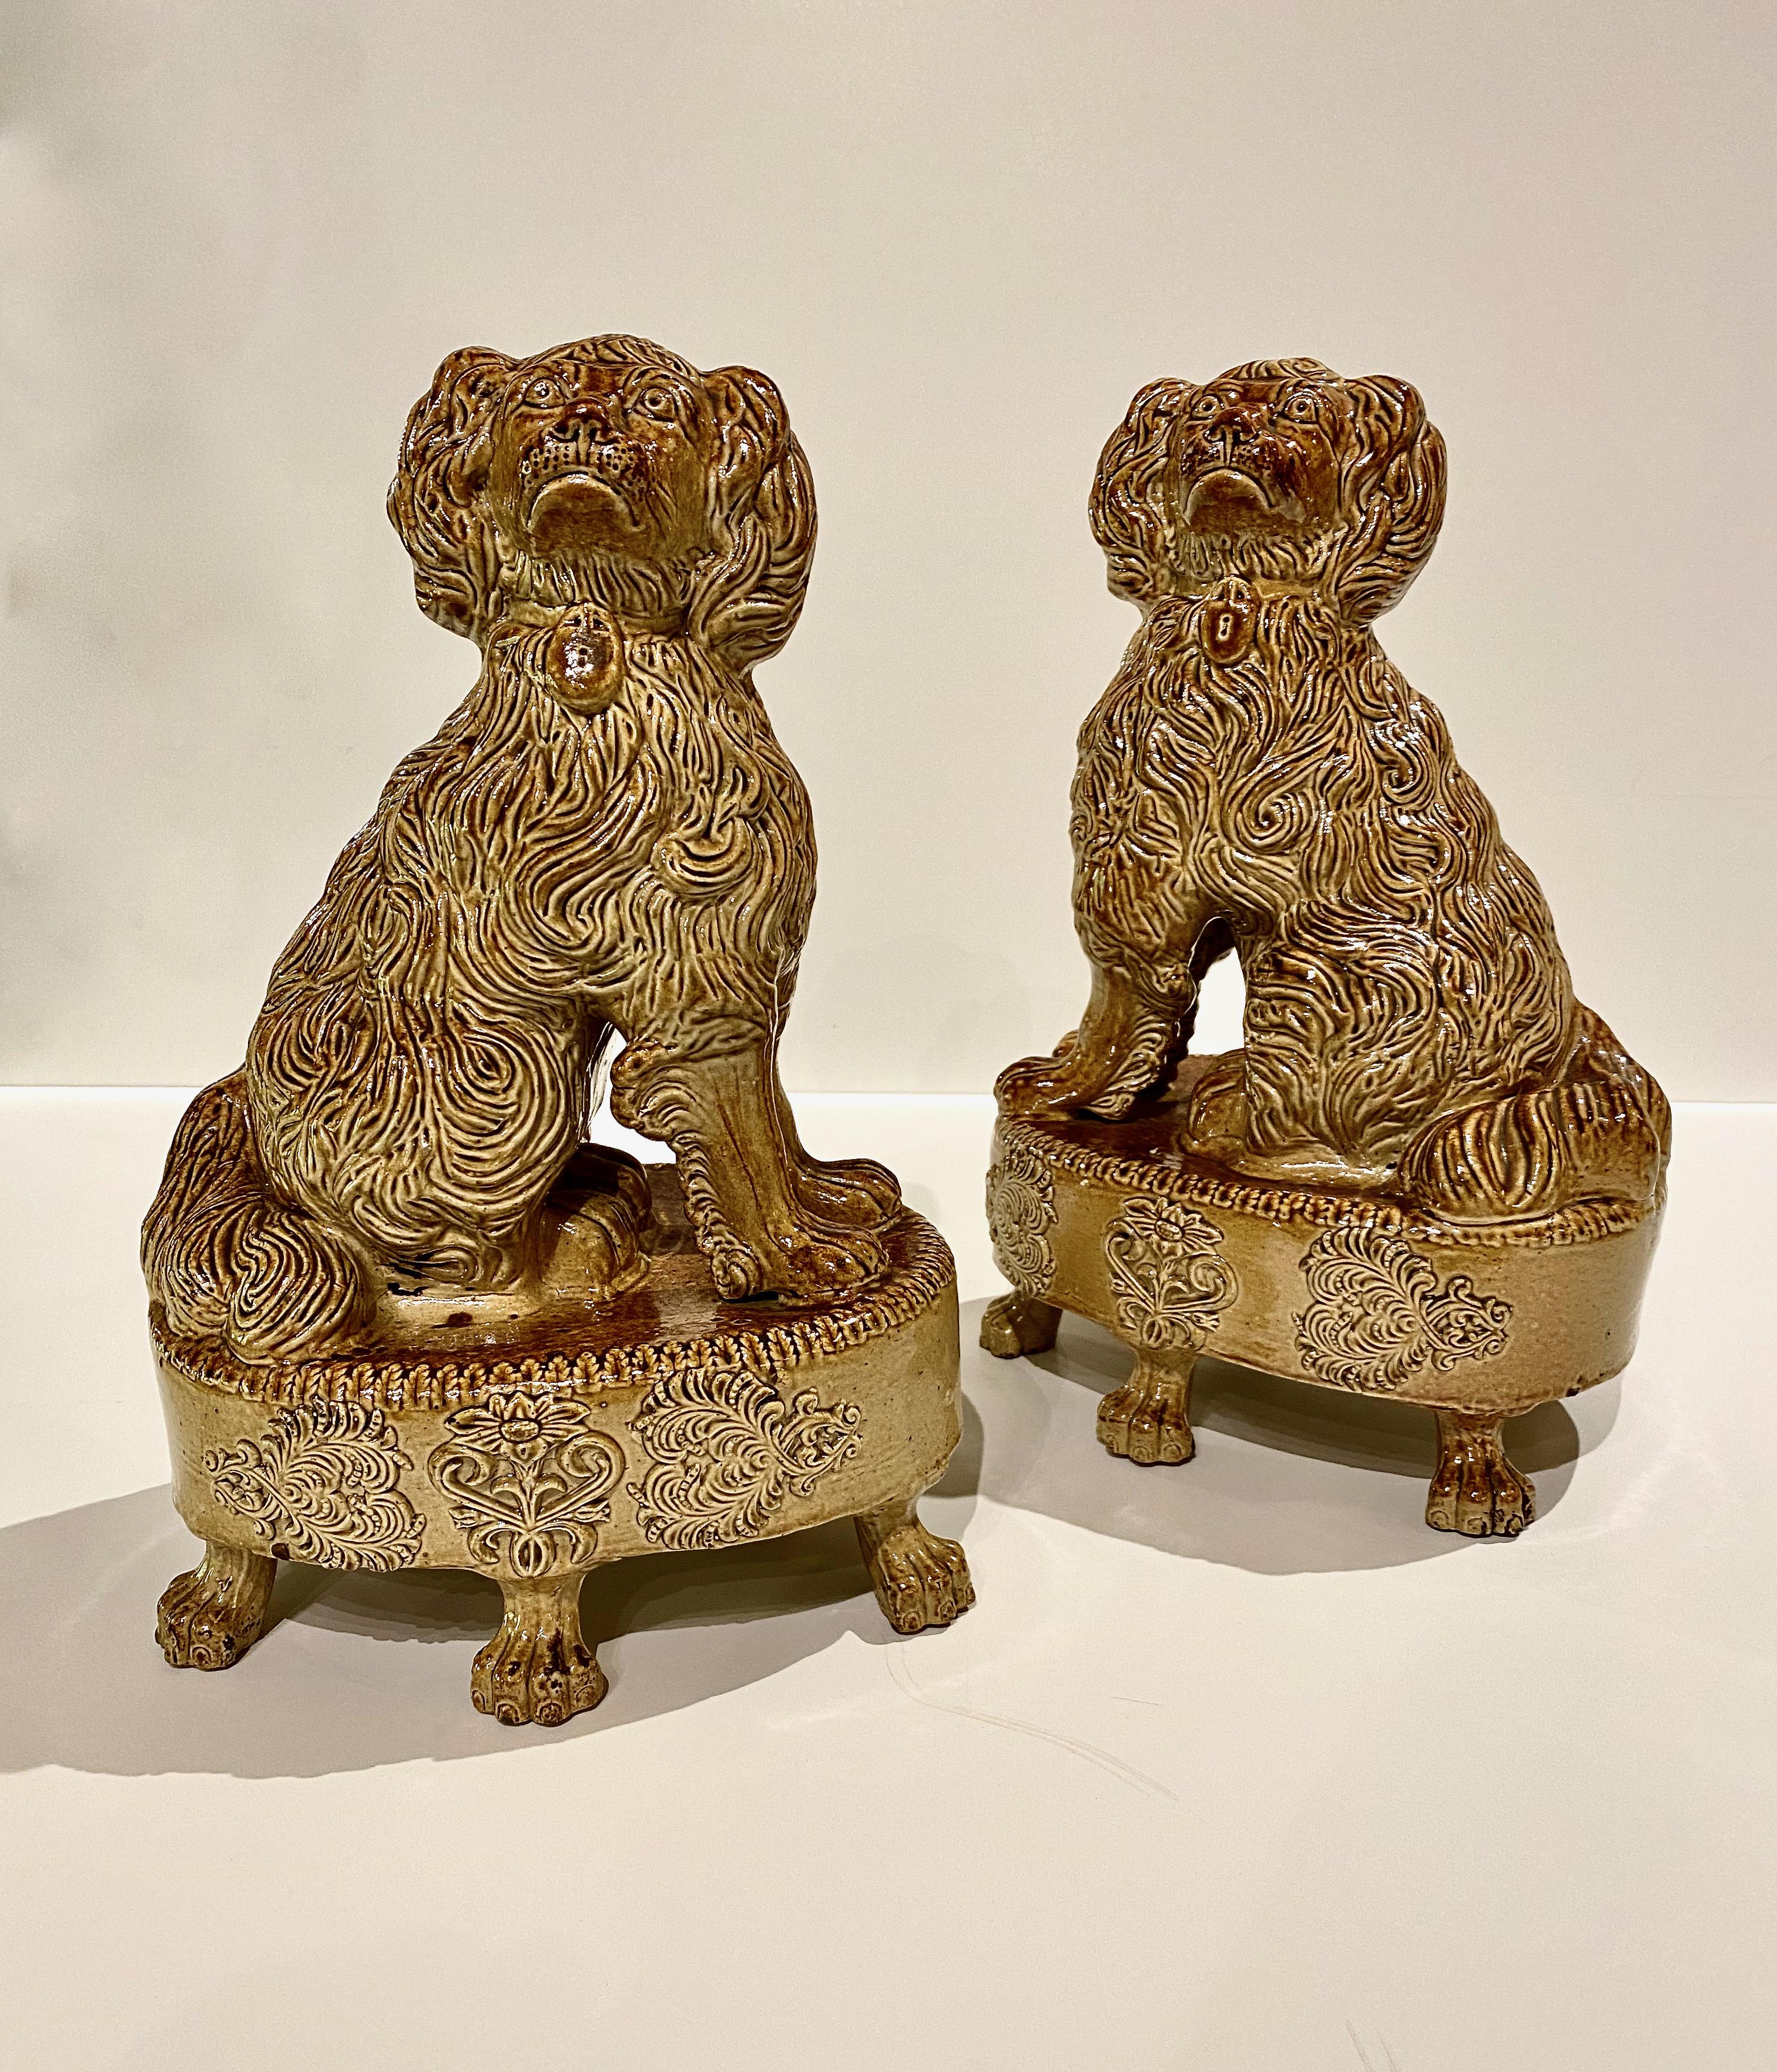 This is an imposing pair of stoneware saltglaze spaniels that were made at the Briddon Pottery in Brampton Derbyshire circa 1830. They are a unique design and historically significant as they are probably the inspiration for figures that were later